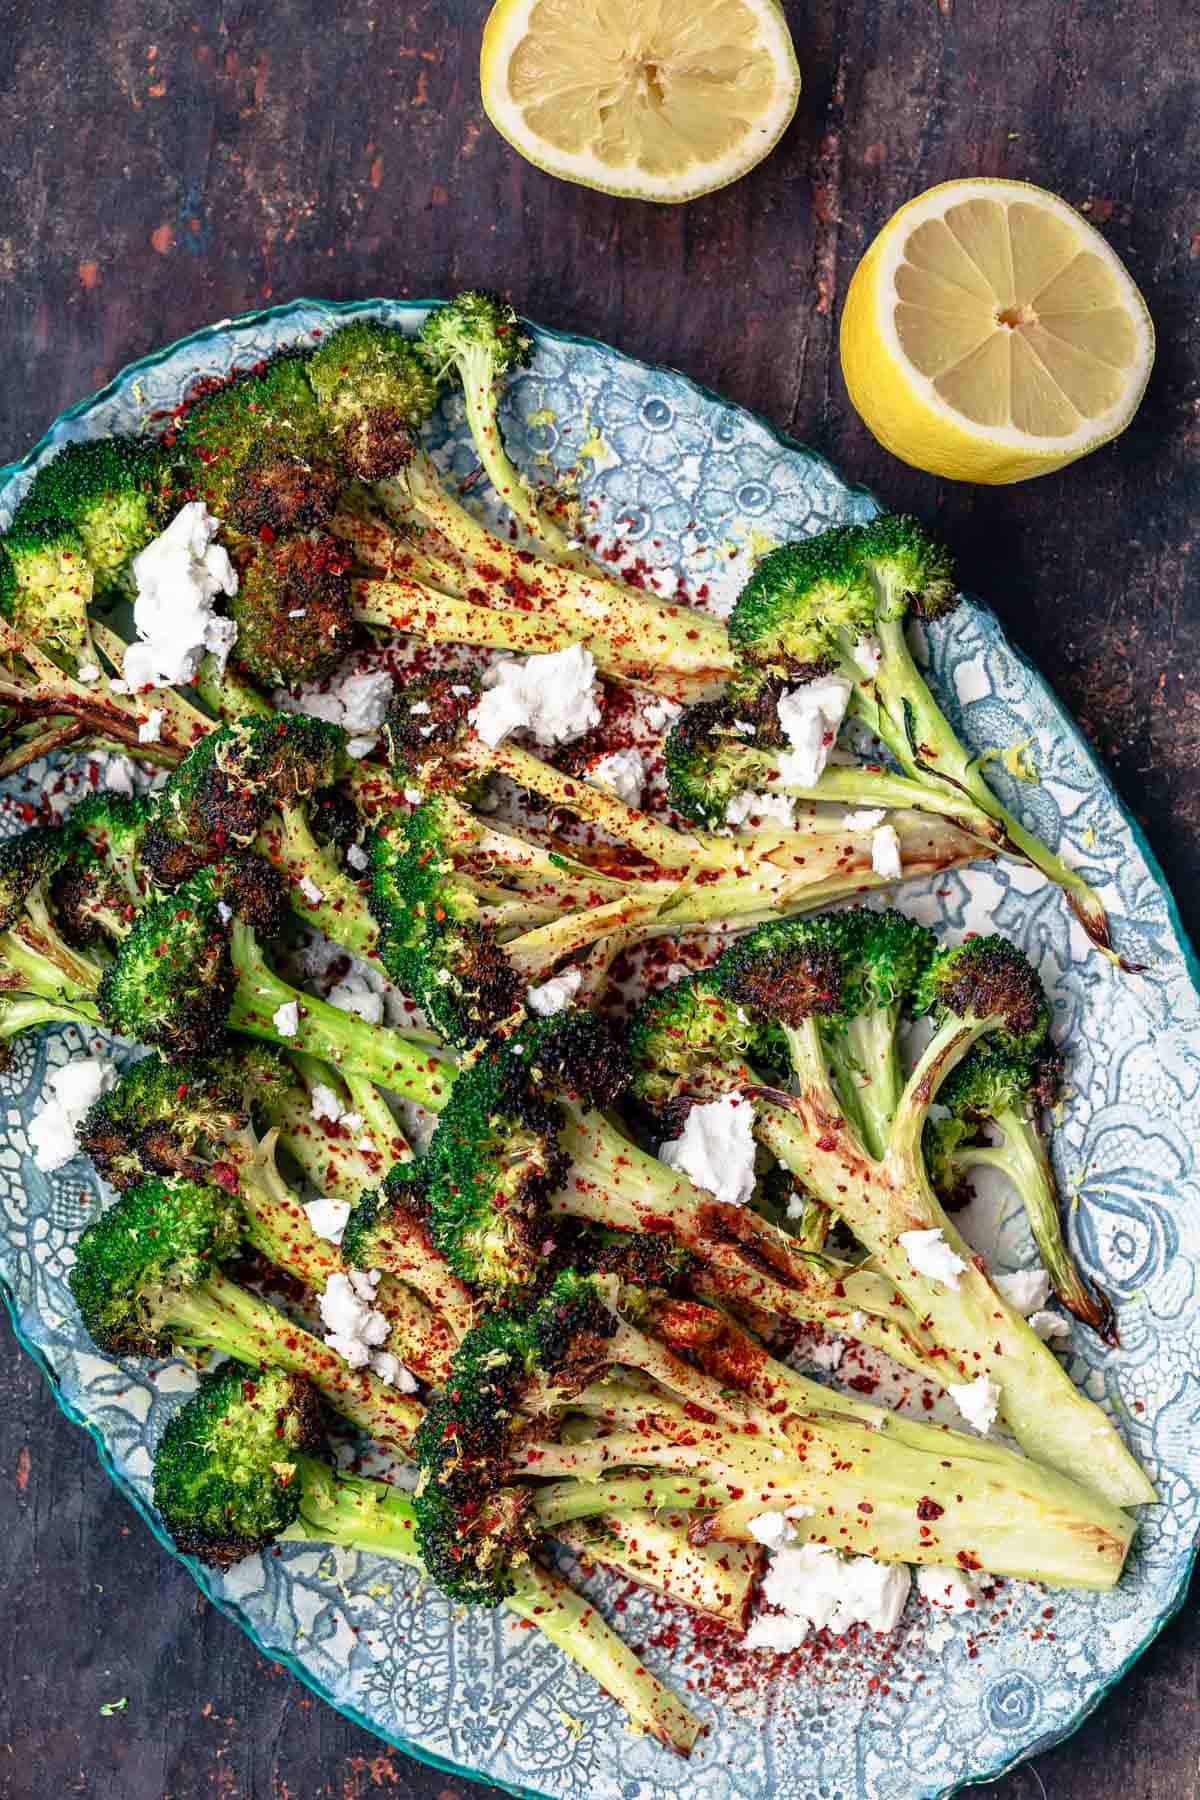 roasted broccoli with feta, red pepper flakes and a side of lemon wedges